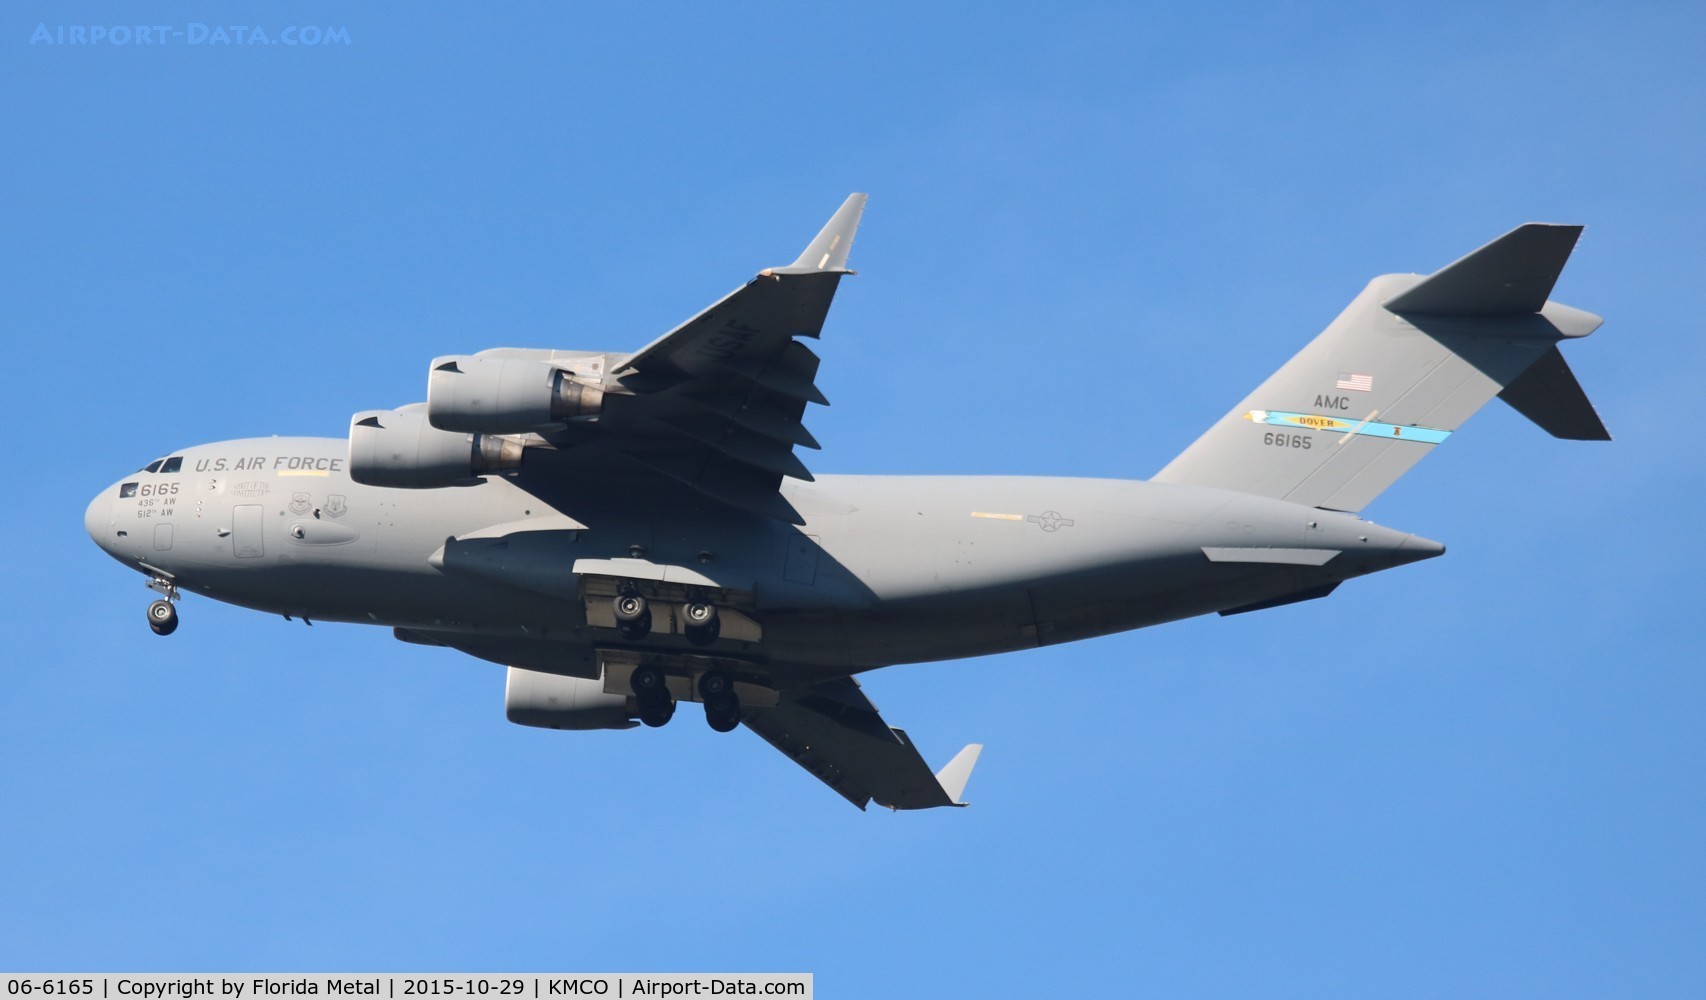 06-6165, 2006 Boeing C-17A Globemaster III C/N F-174/P-165, MCO zx Airlift and Tanker Convention 2015